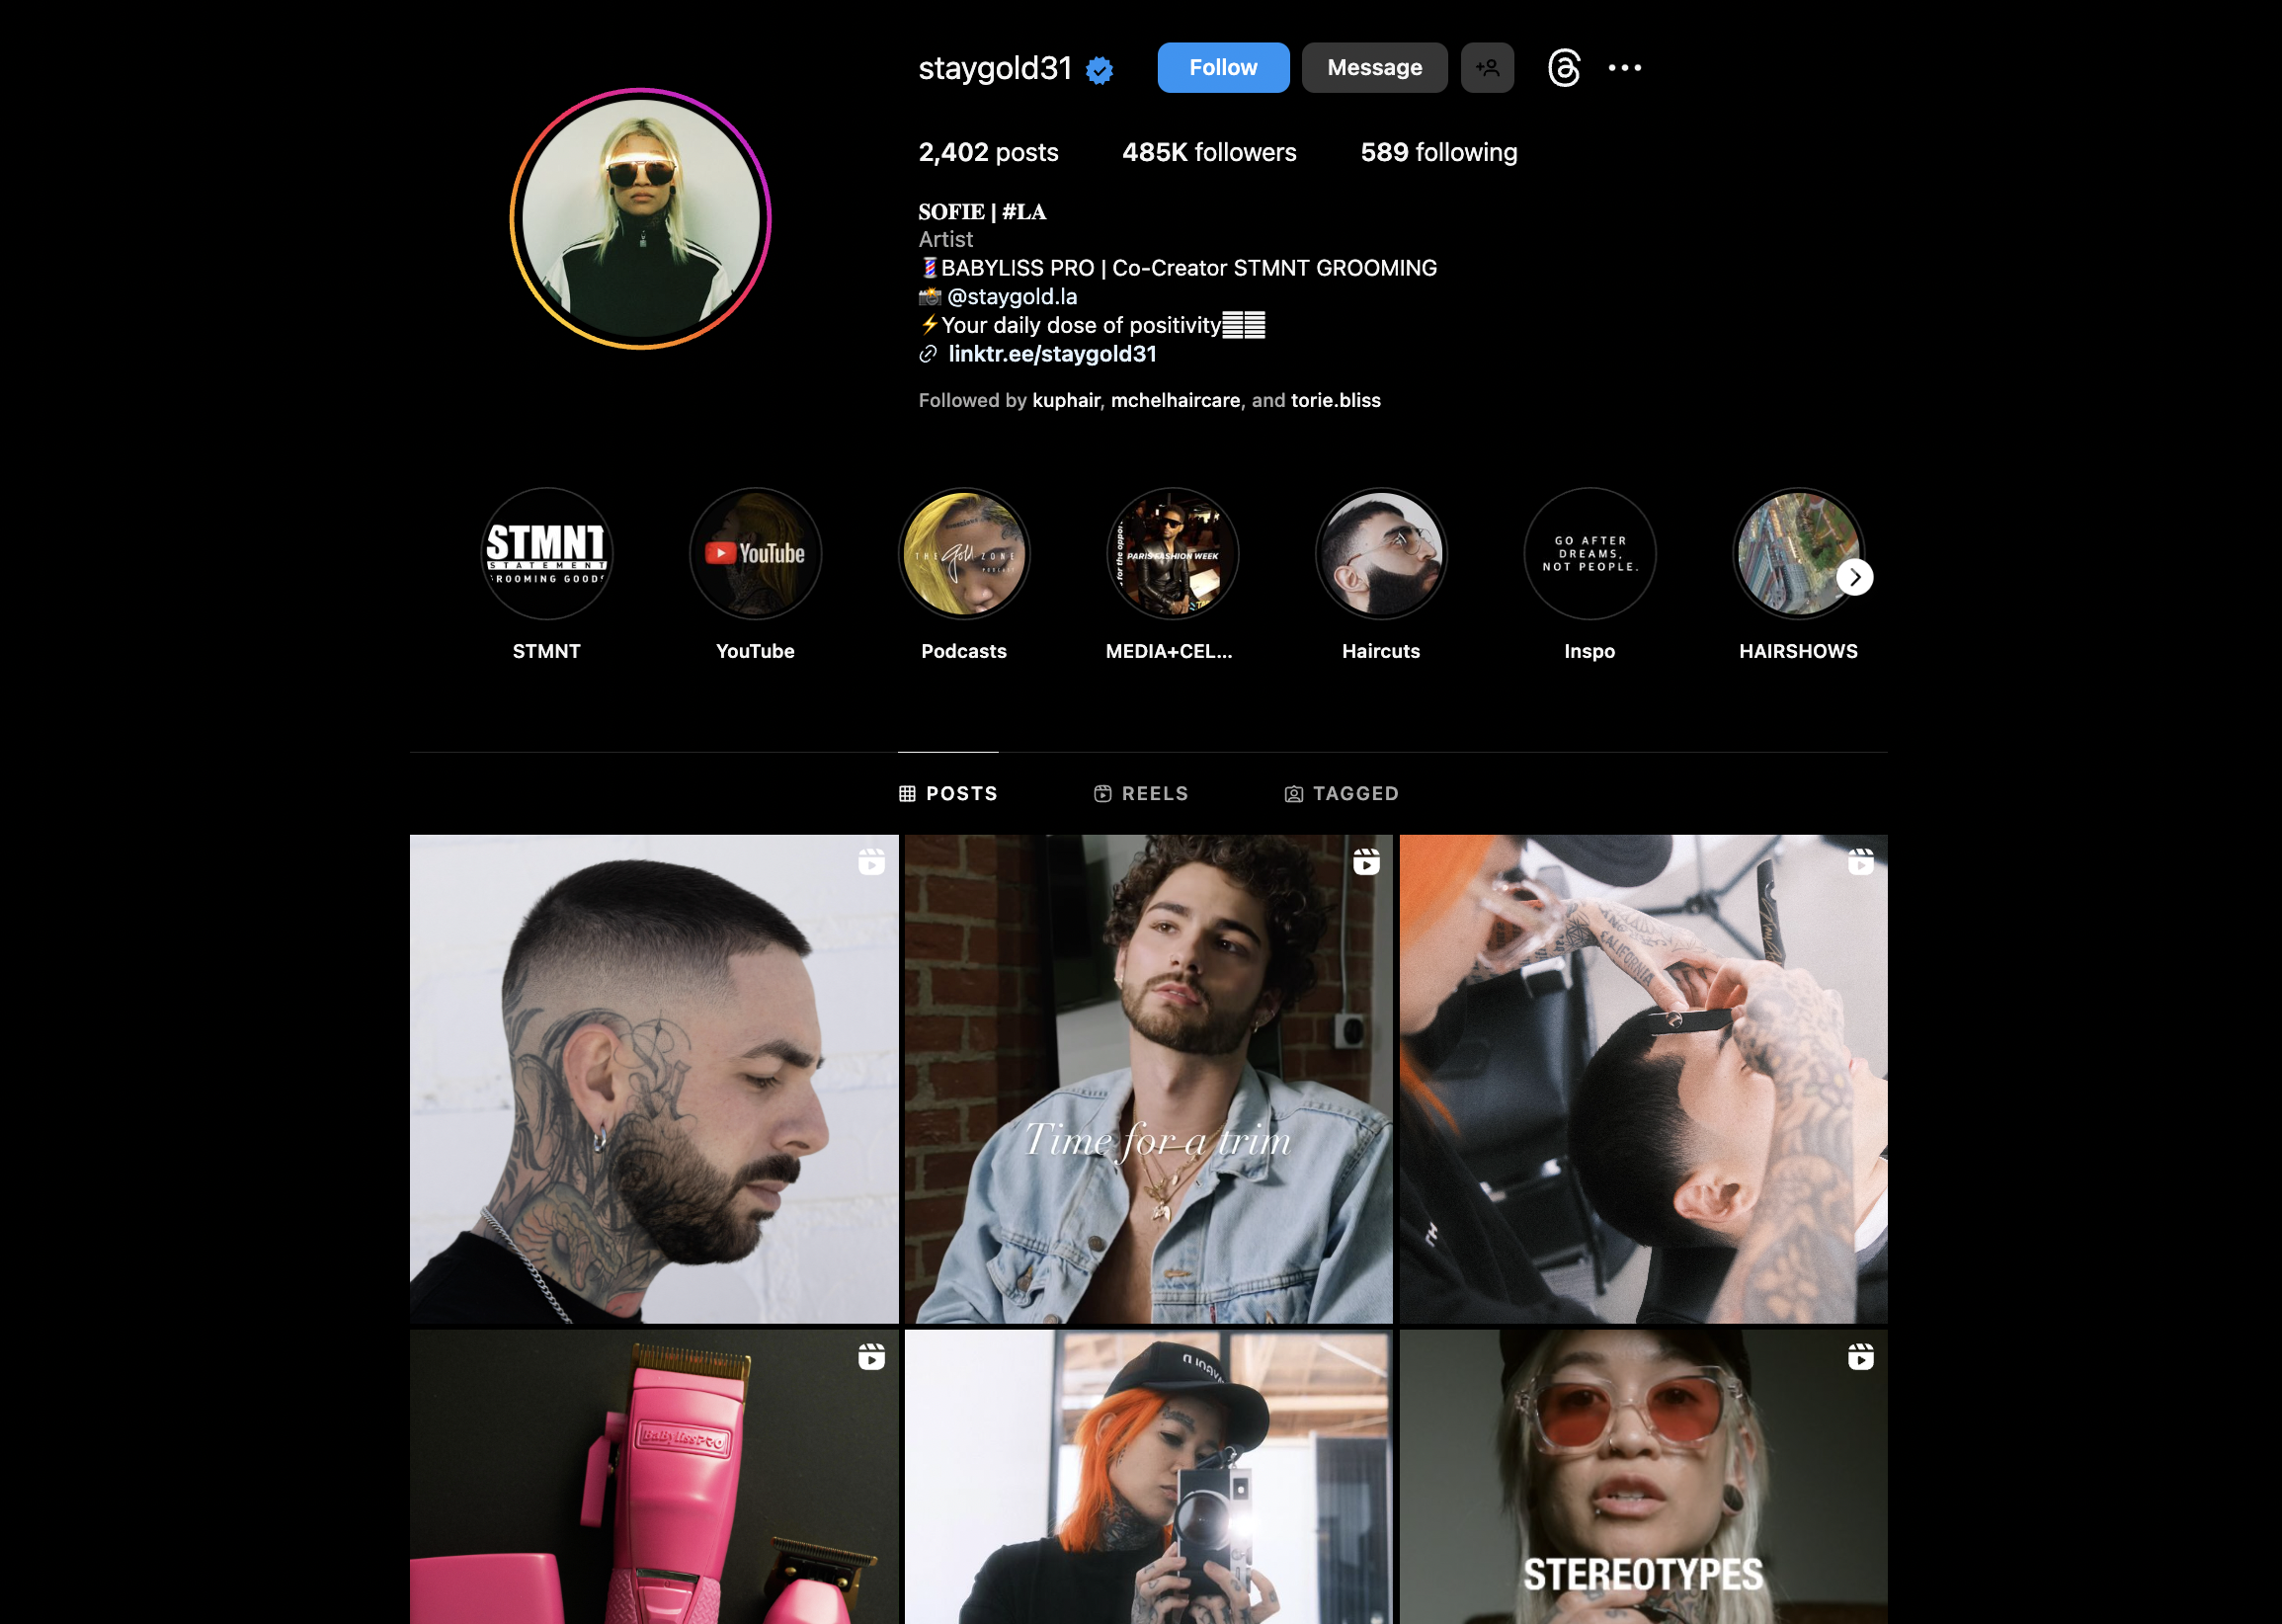 This image shows barbering pro and her instagram posts.